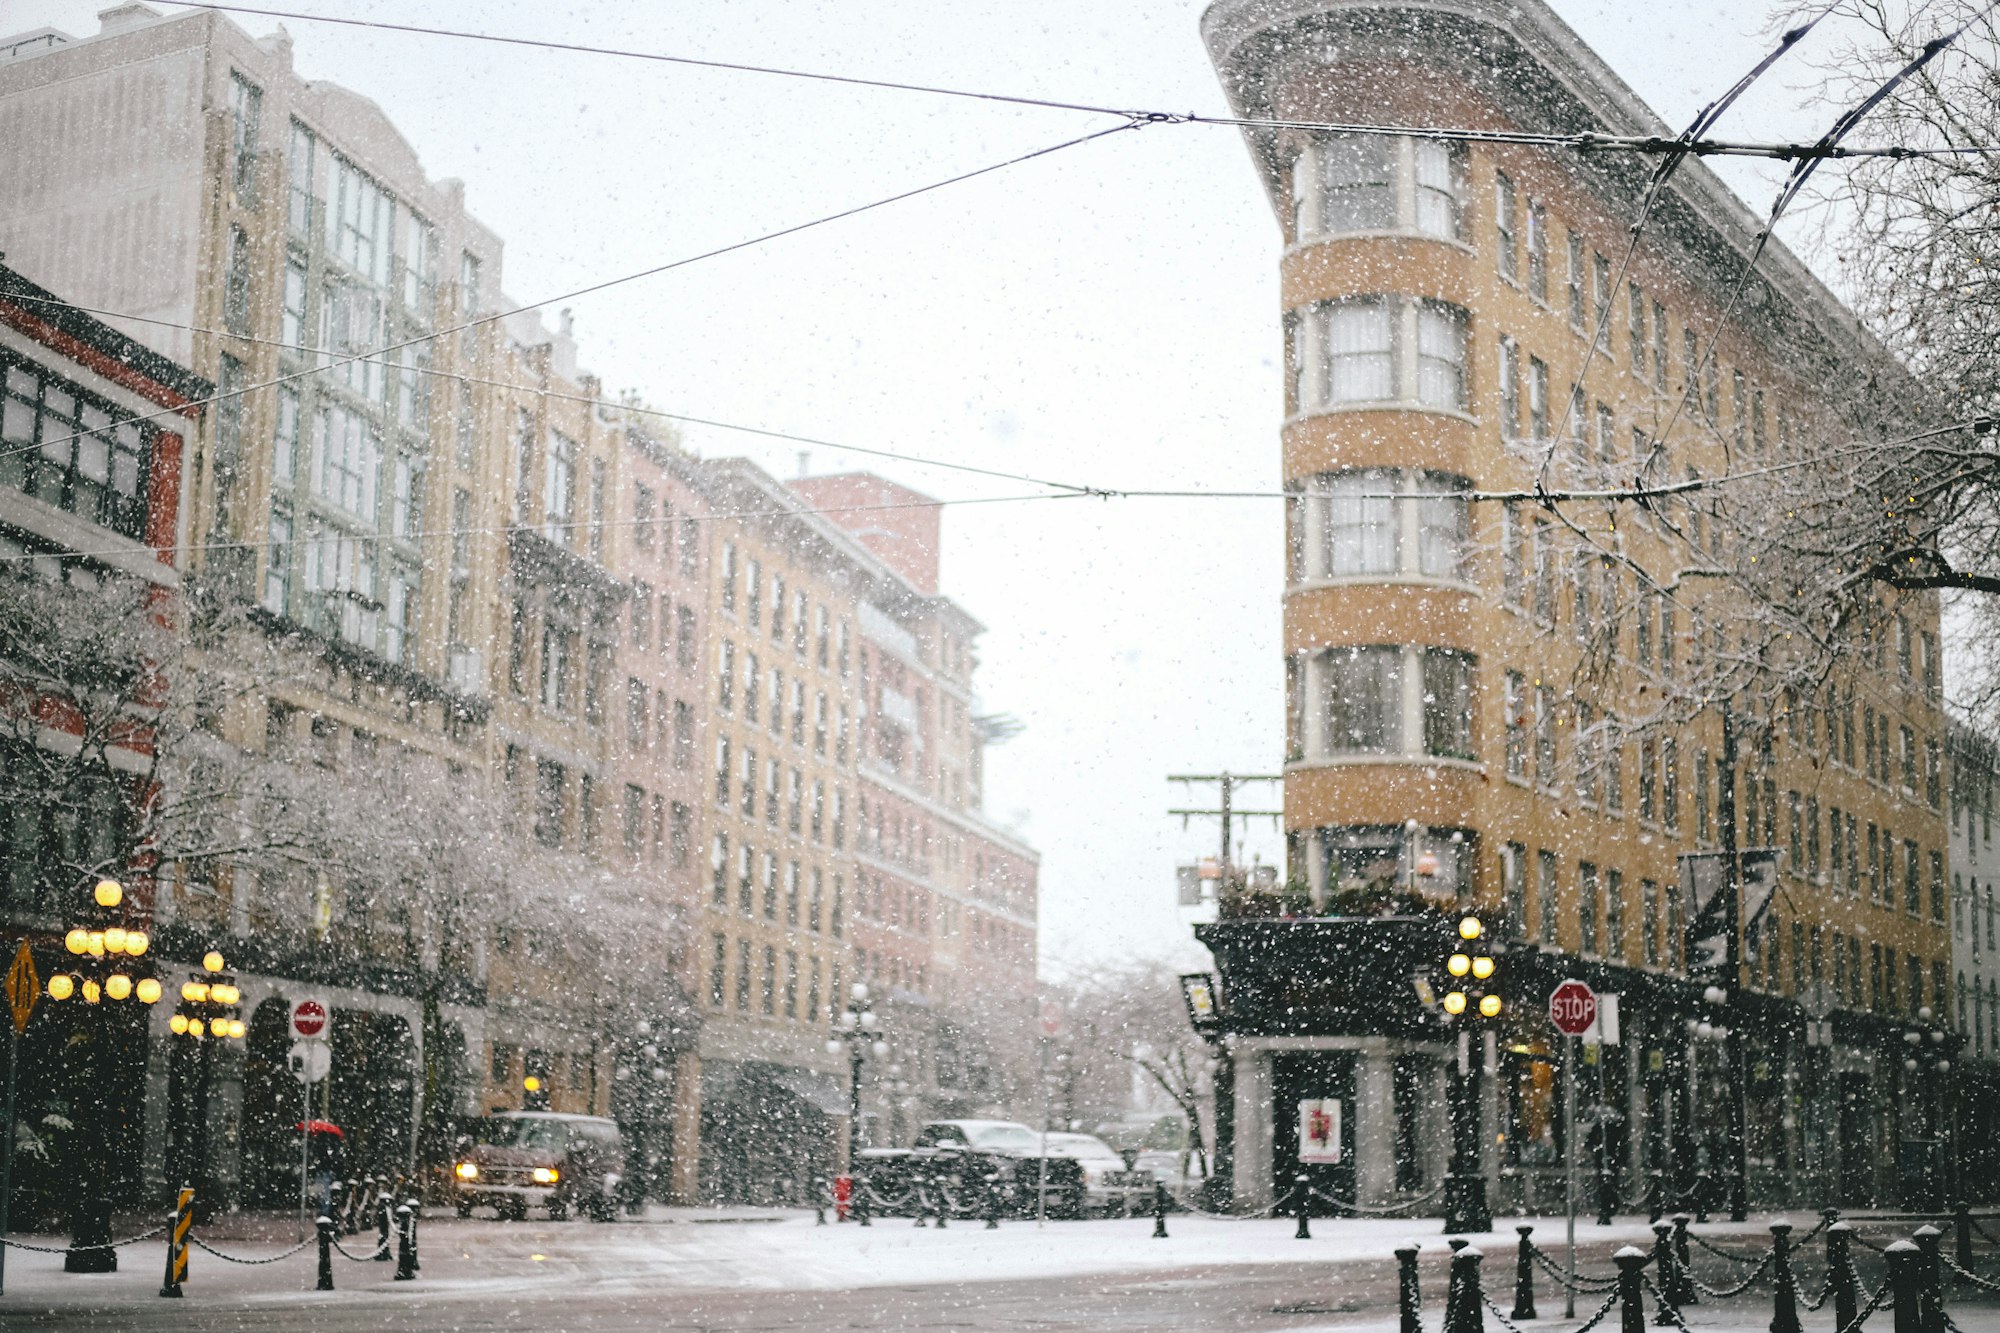 A snowy day in Vancouver